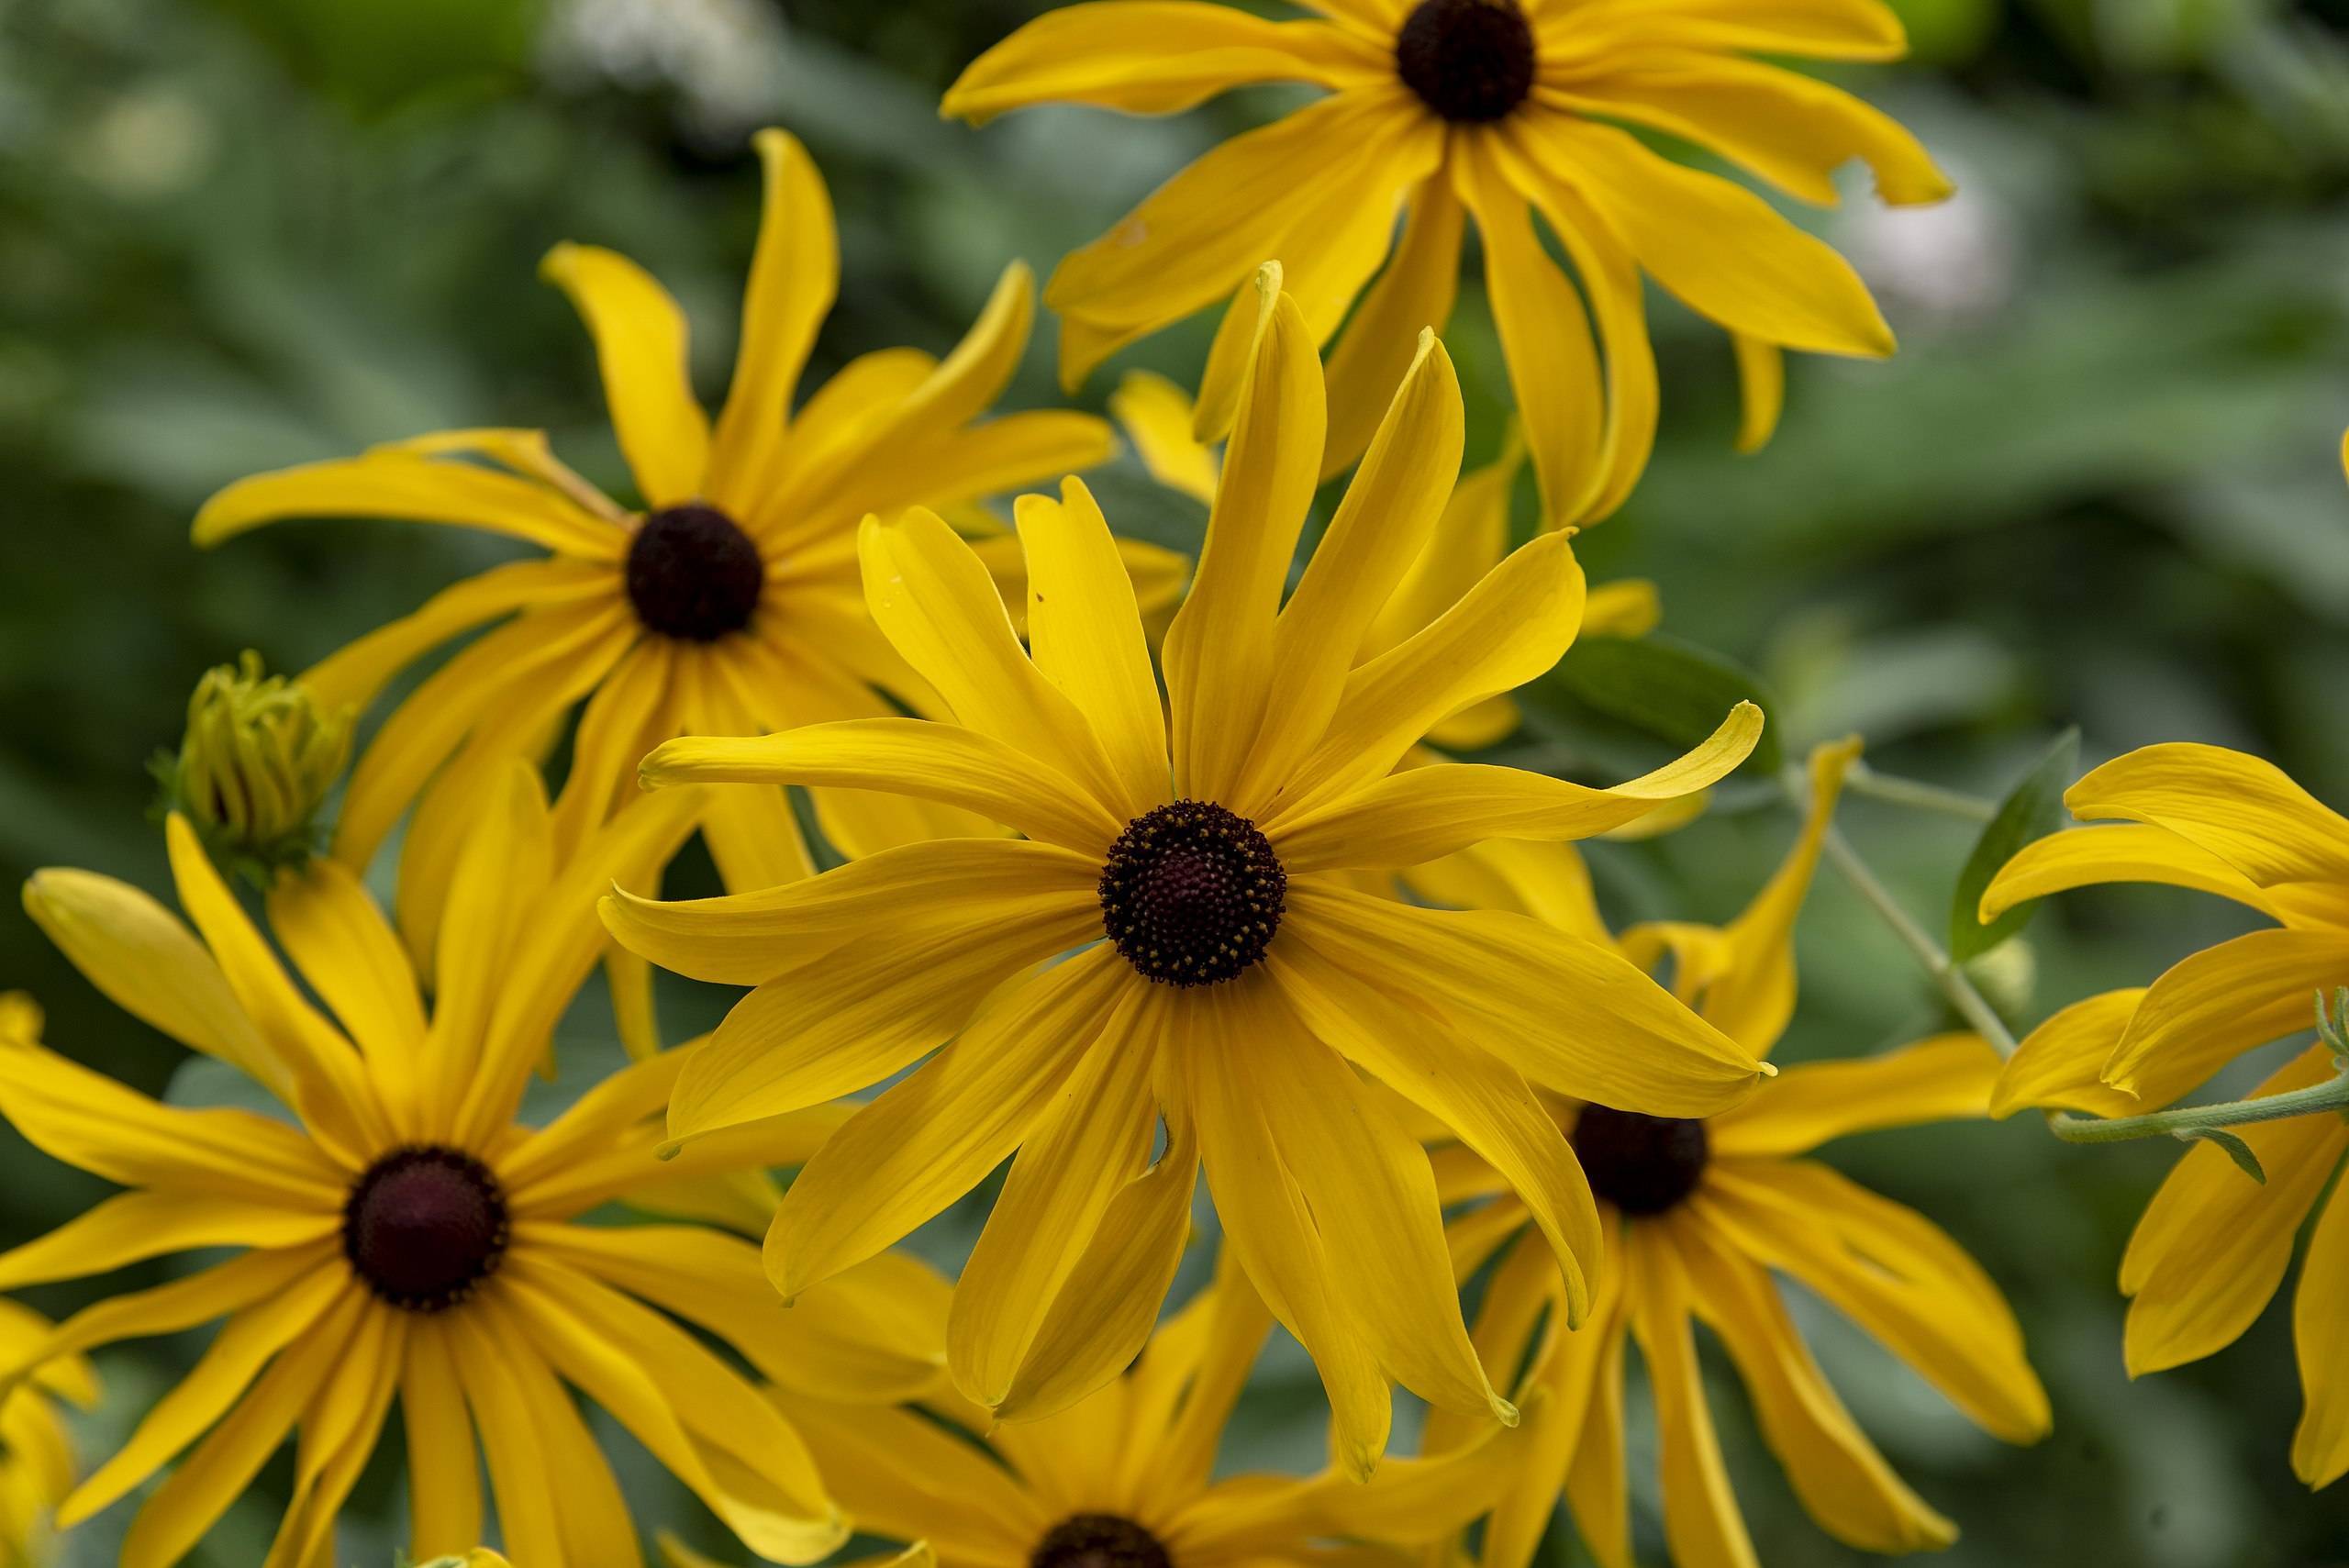 yellow flowers with black center, green leaves and green stems